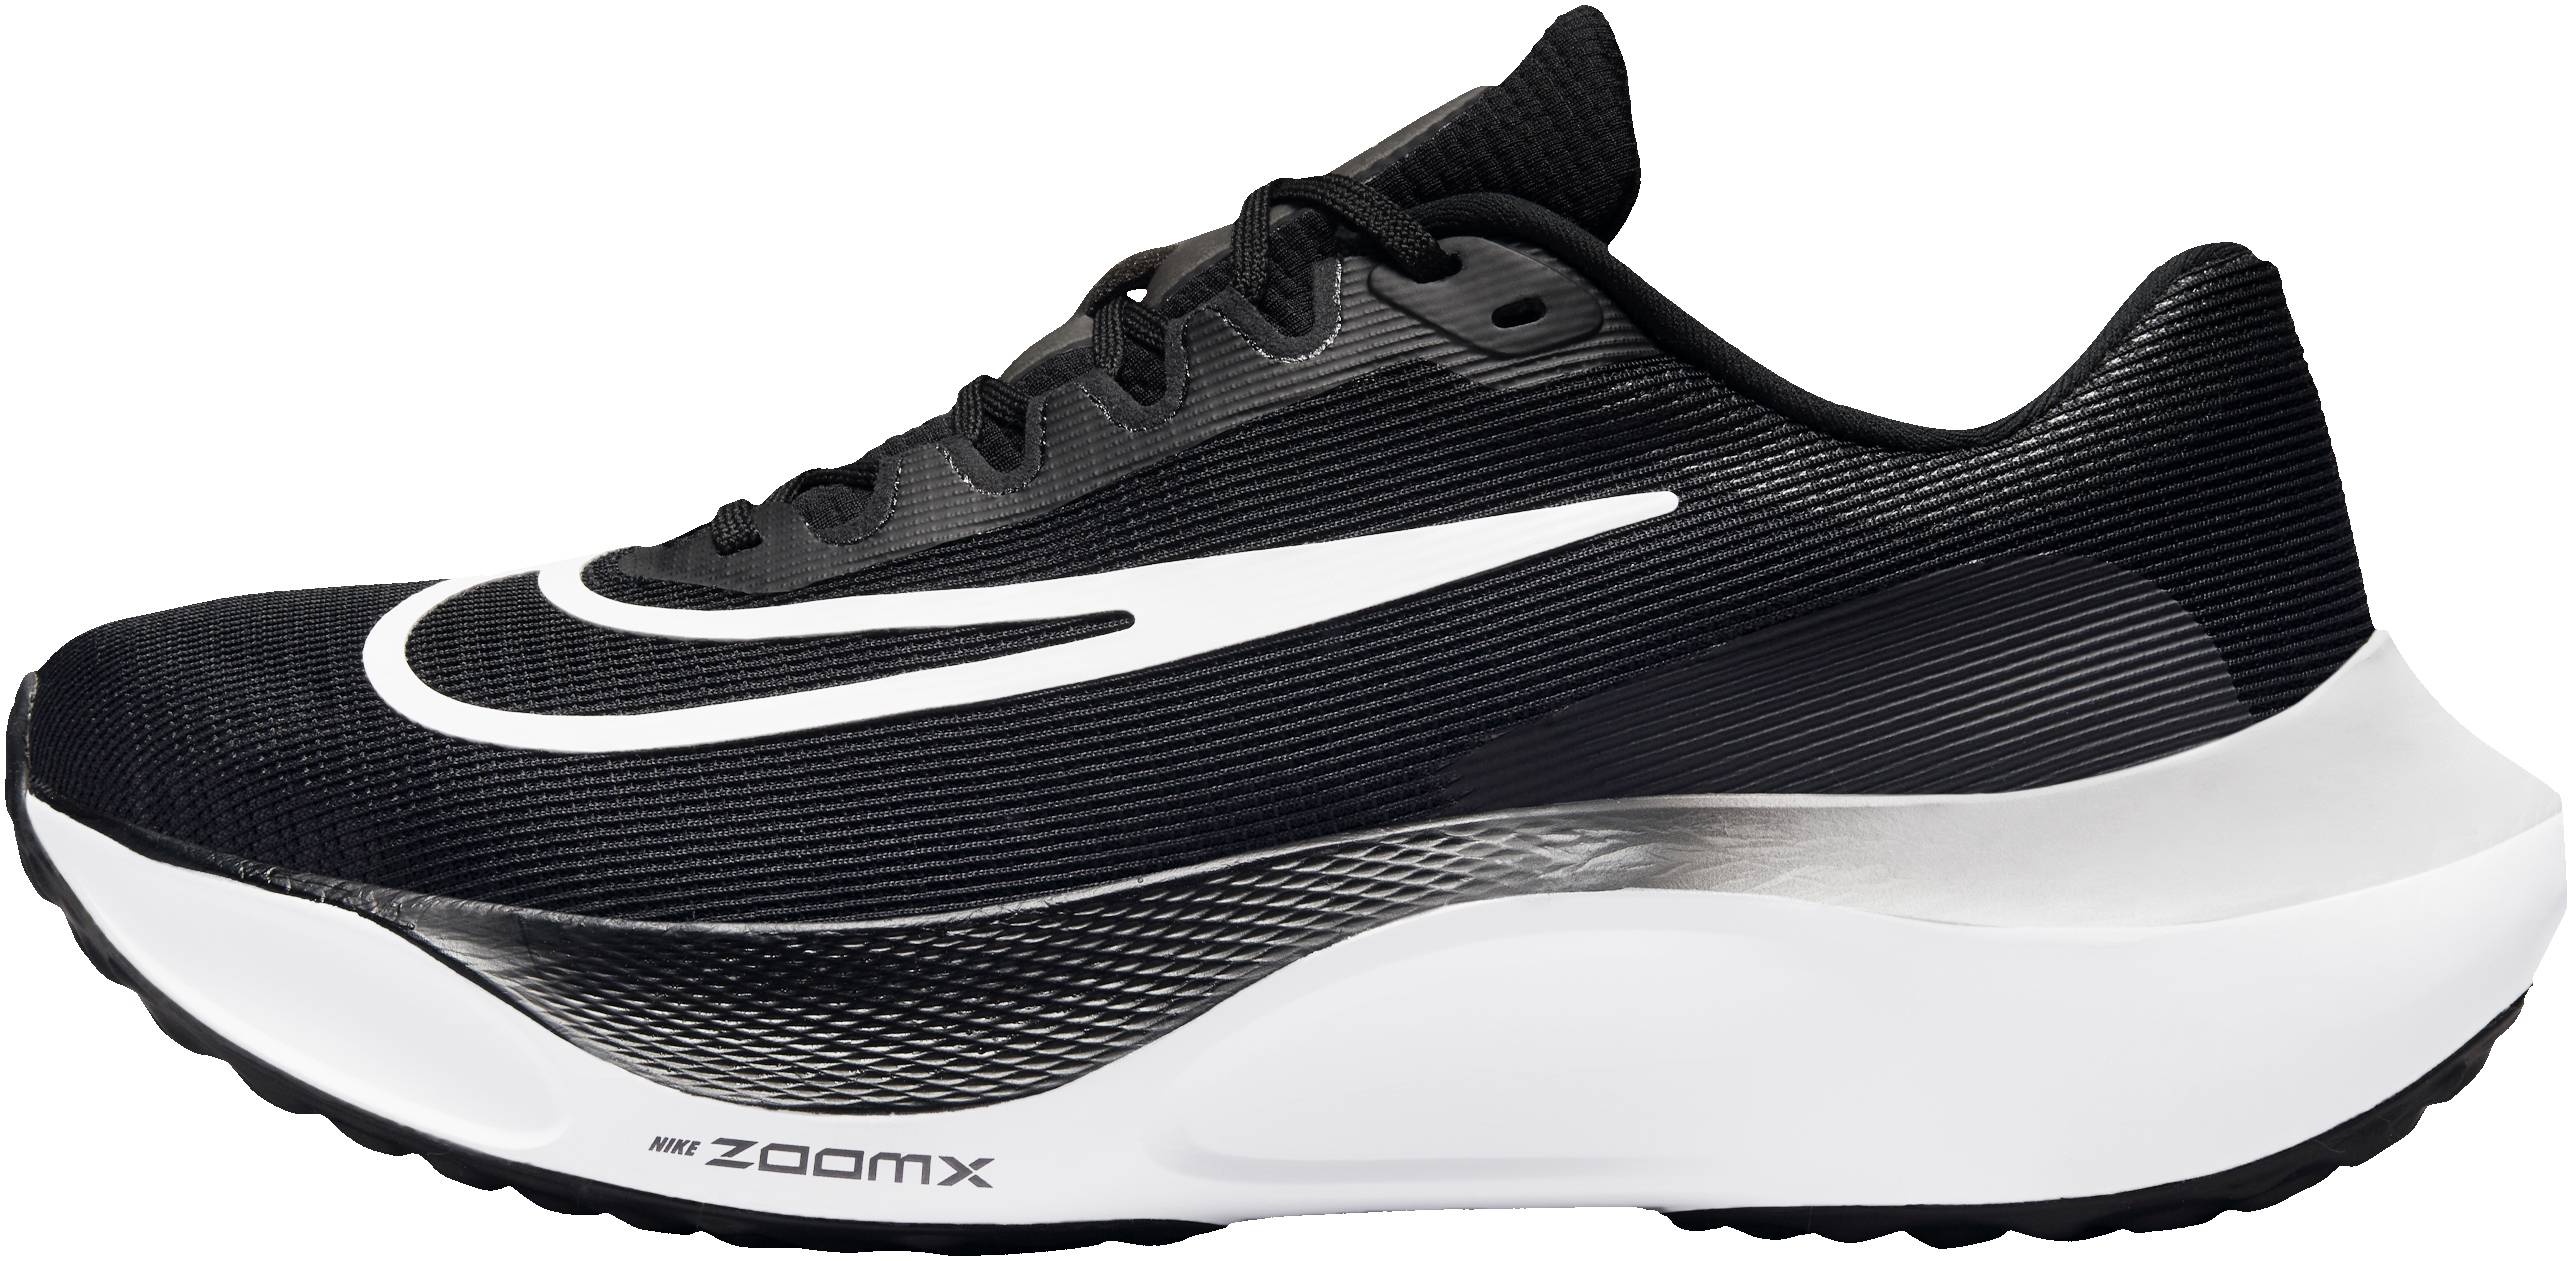 Concentration Splendor prototype Nike Zoom Fly 5 Review 2023, Facts, Deals ($112) | RunRepeat